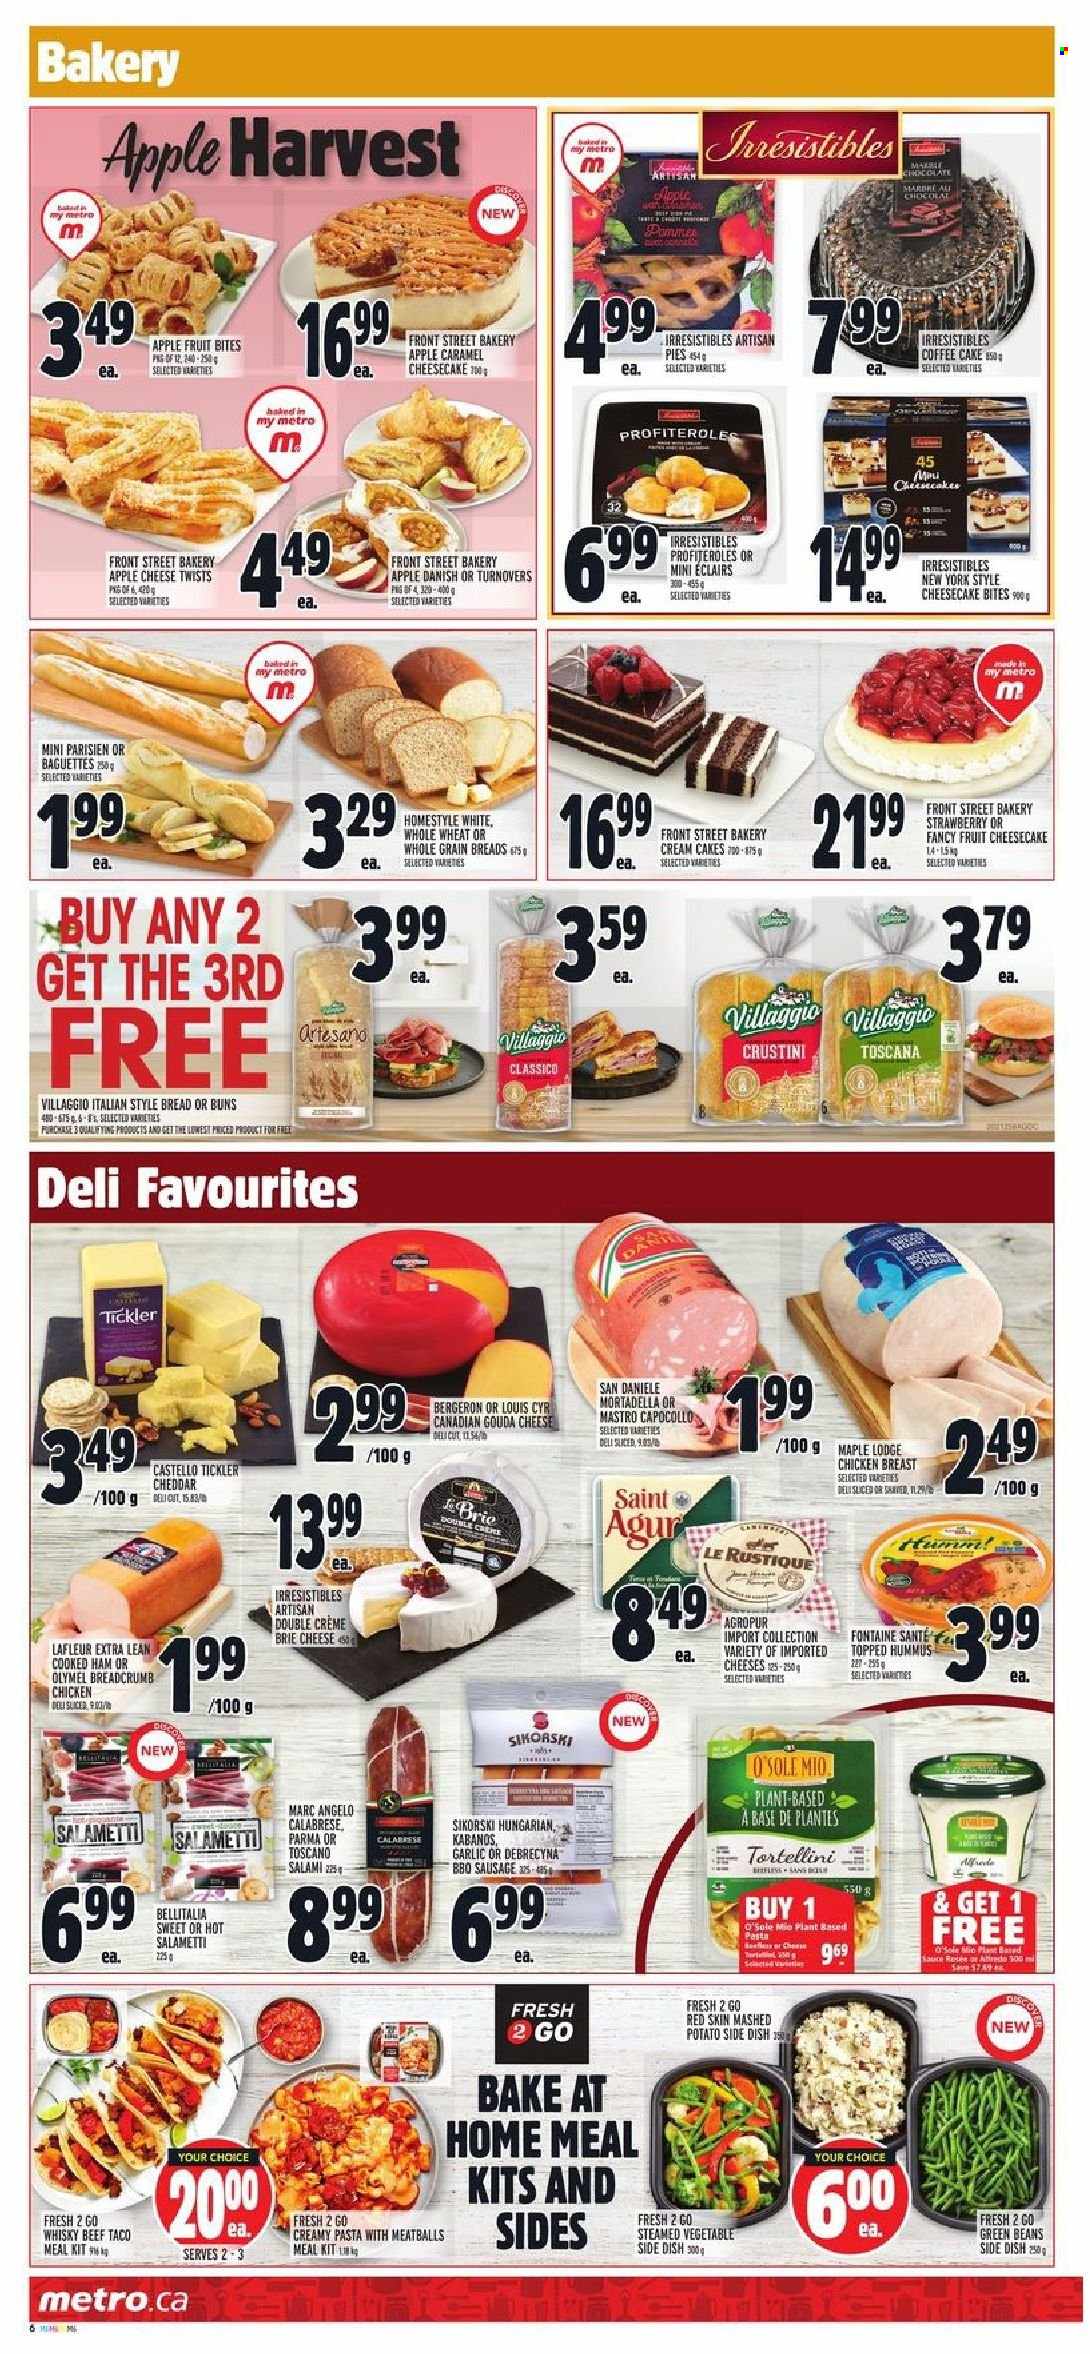 thumbnail - Metro Flyer - September 30, 2021 - October 06, 2021 - Sales products - bread, cake, buns, turnovers, cheesecake, coffee cake, garlic, green beans, meatballs, tortellini, cooked ham, mortadella, salami, ham, sausage, hummus, gouda, cheddar, cheese, brie, caramel, Classico, whisky, chicken breasts, chicken, slicer, pet bed, baguette. Page 6.